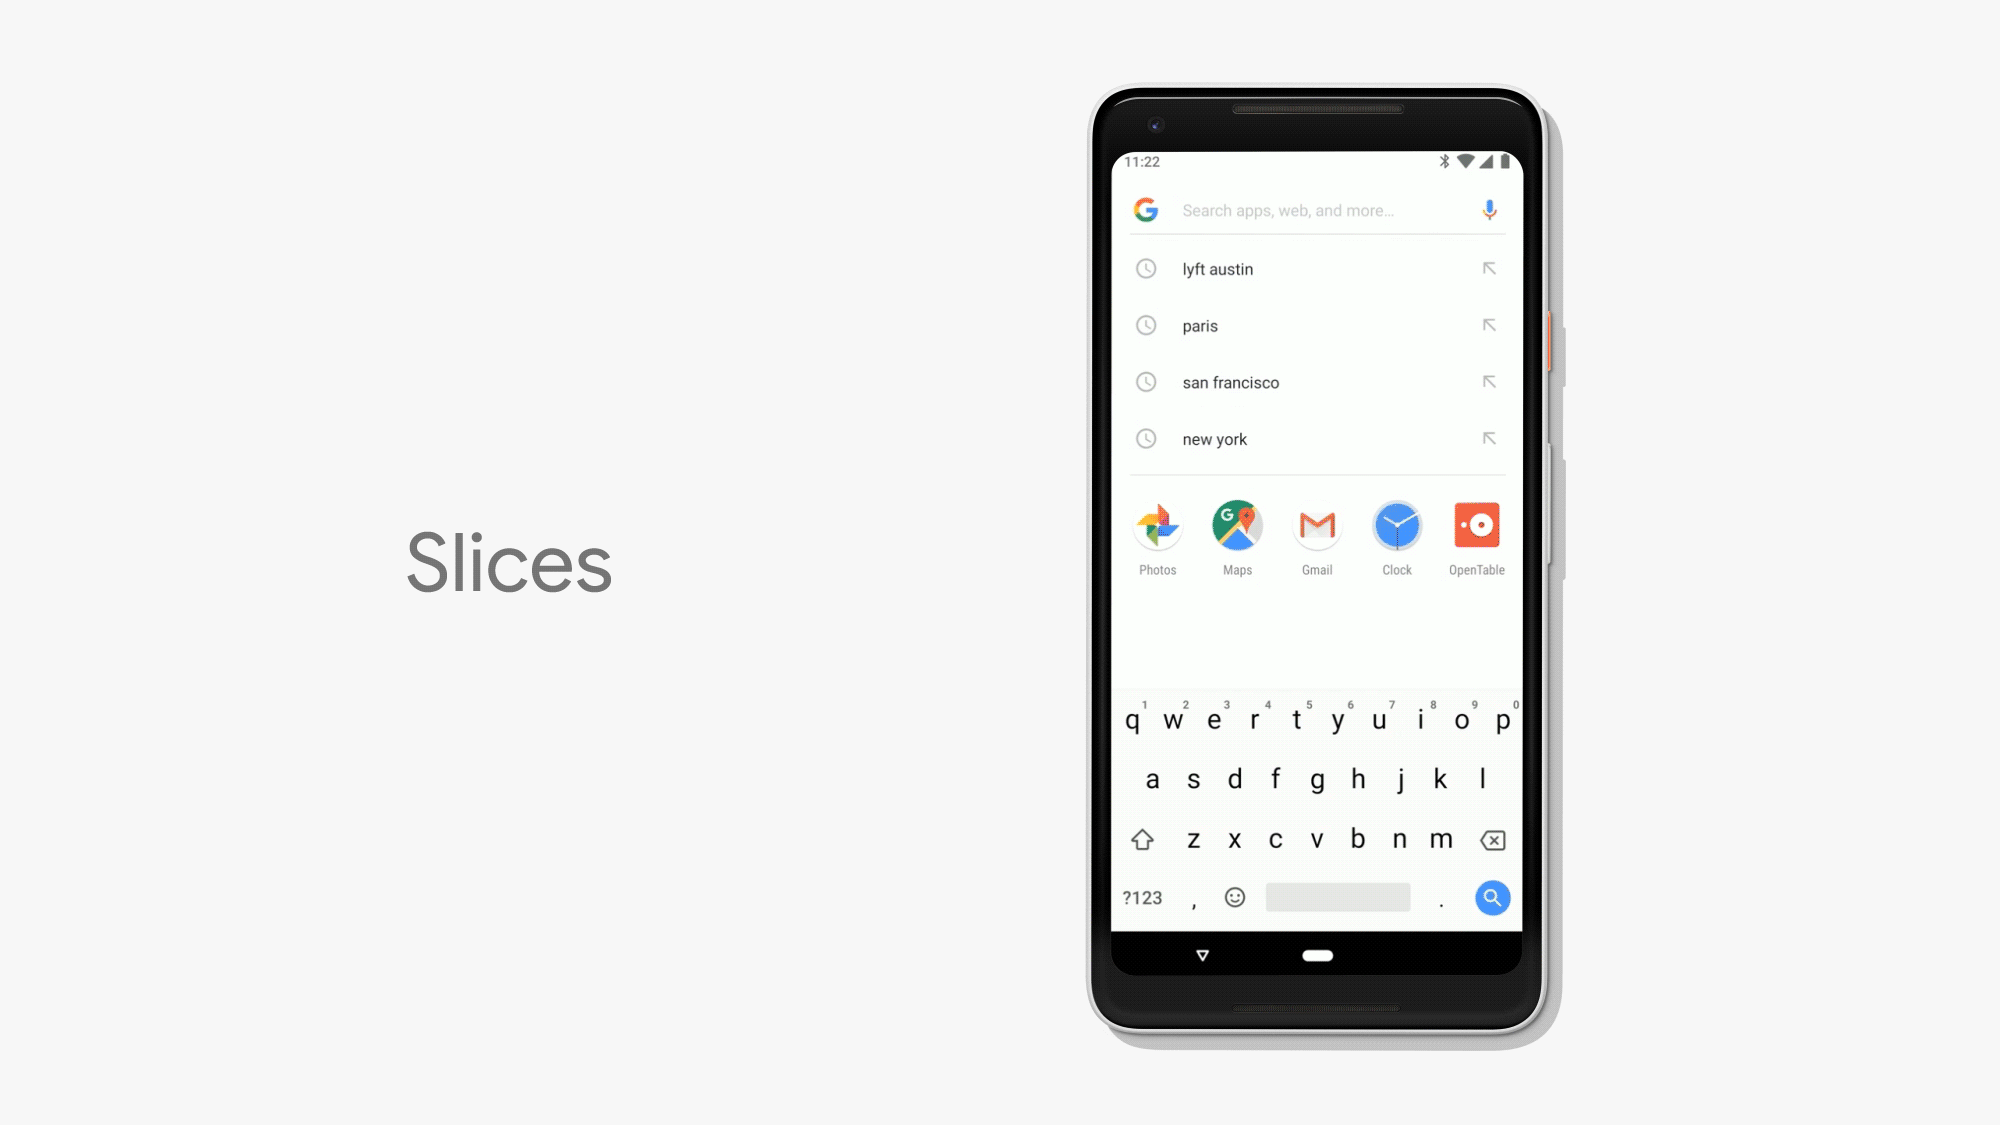 Android P - Slices